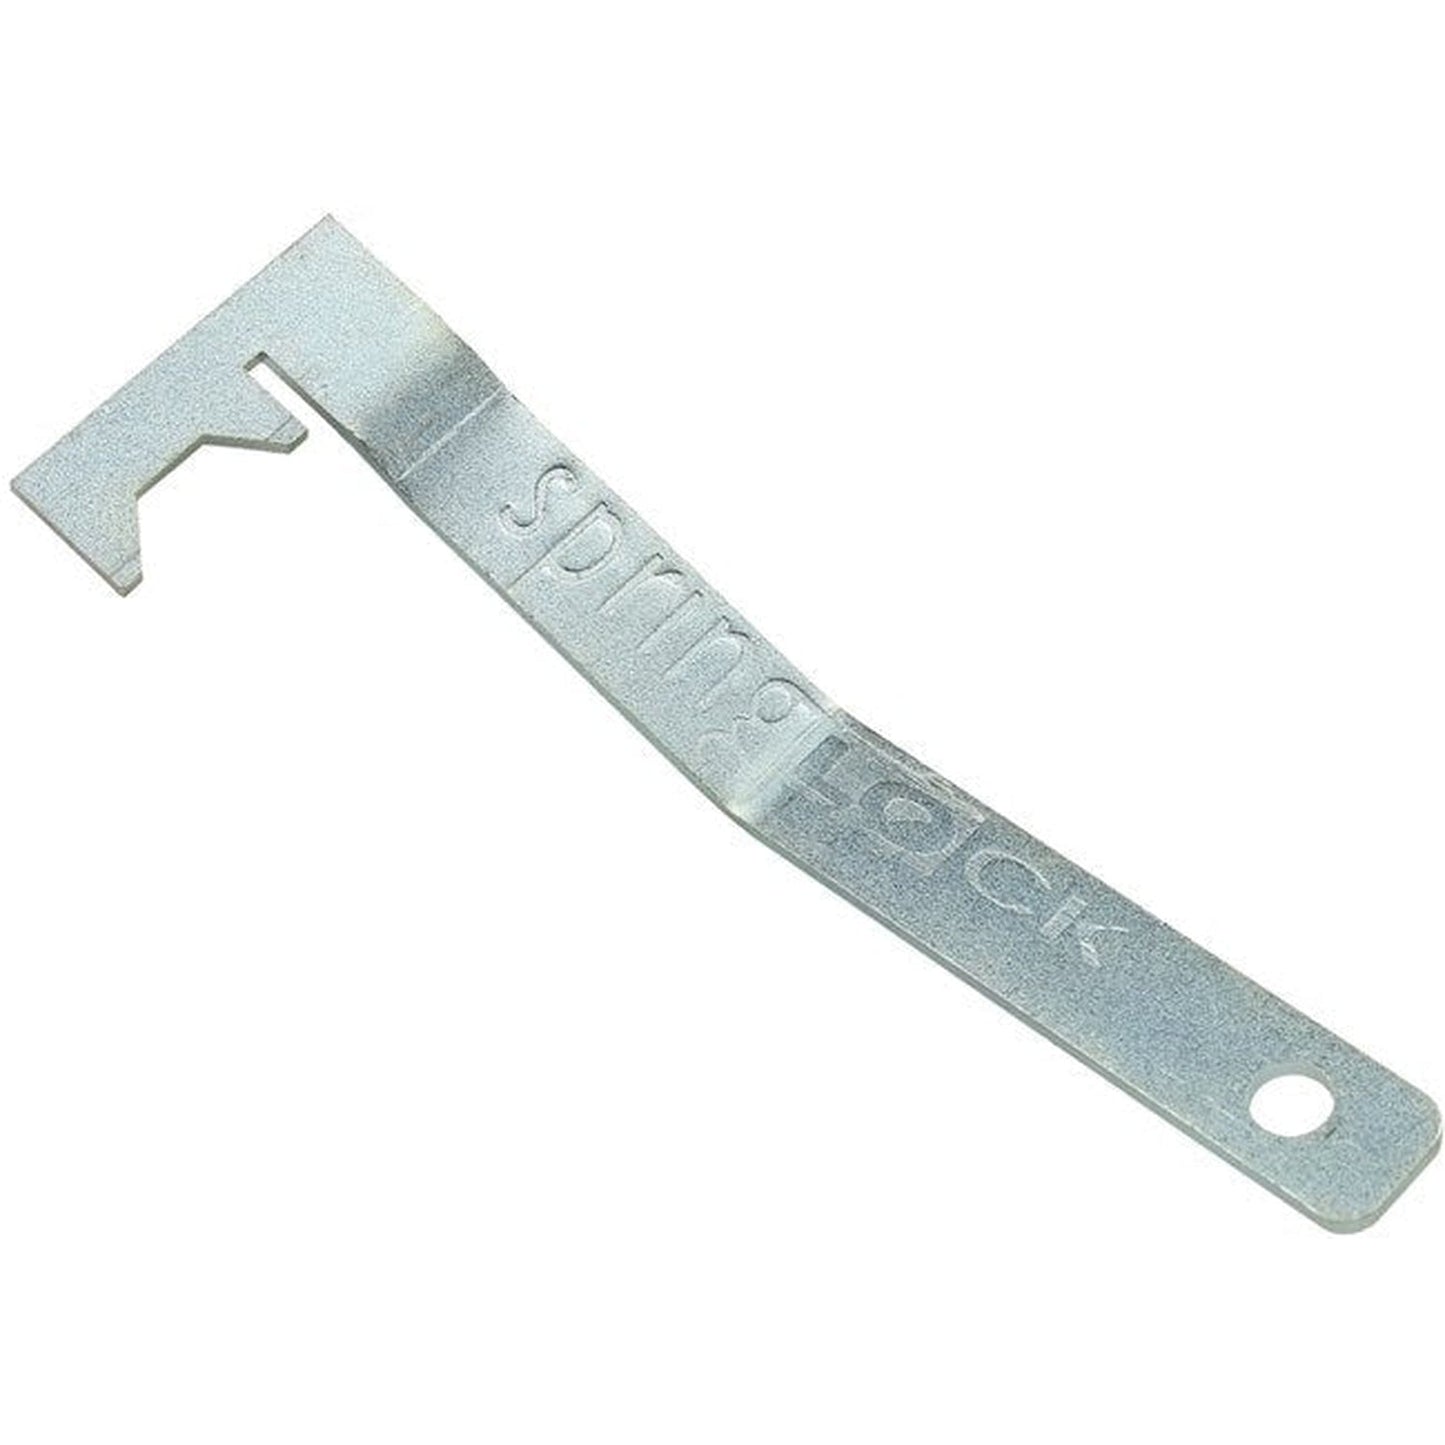 Springlock Removal Tool For Anti-Theft Picture Frame Hanging System